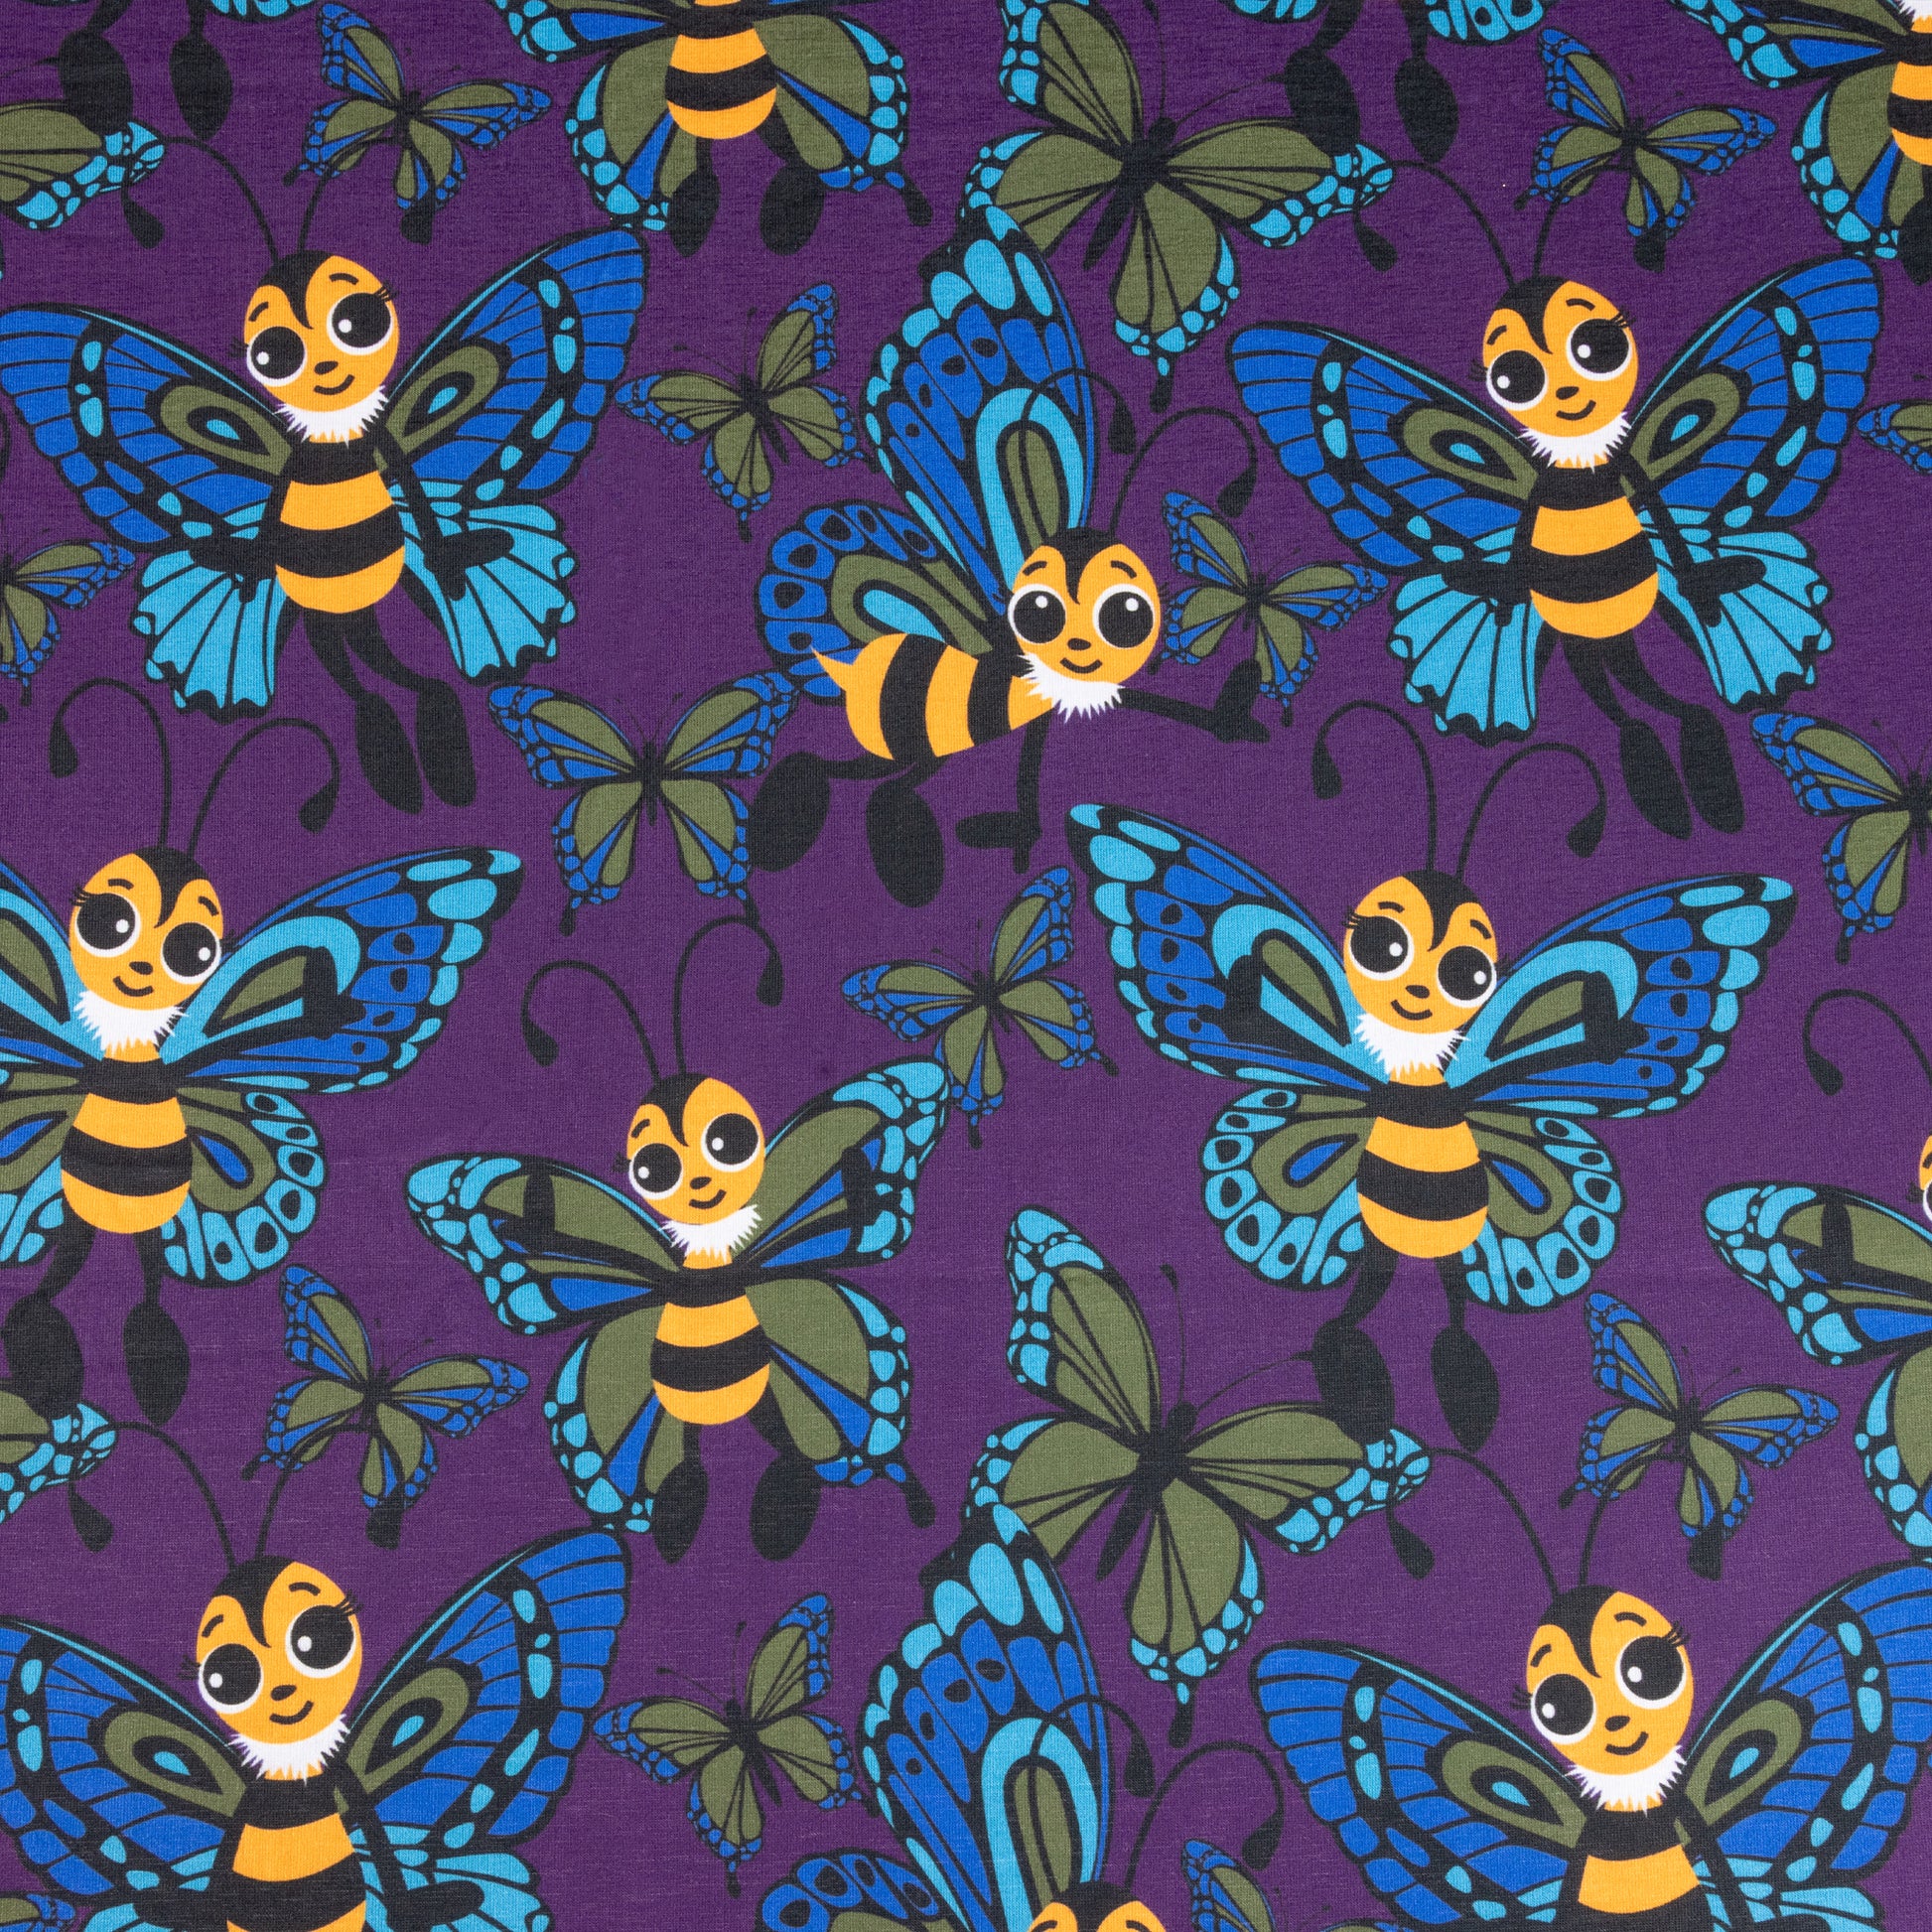 A fabric showing cute cartoon bees with butterfly wings. The bees are yellow and black with eyelashes, their wings are blue and green. They are against a purple background with various sized butterflies too.